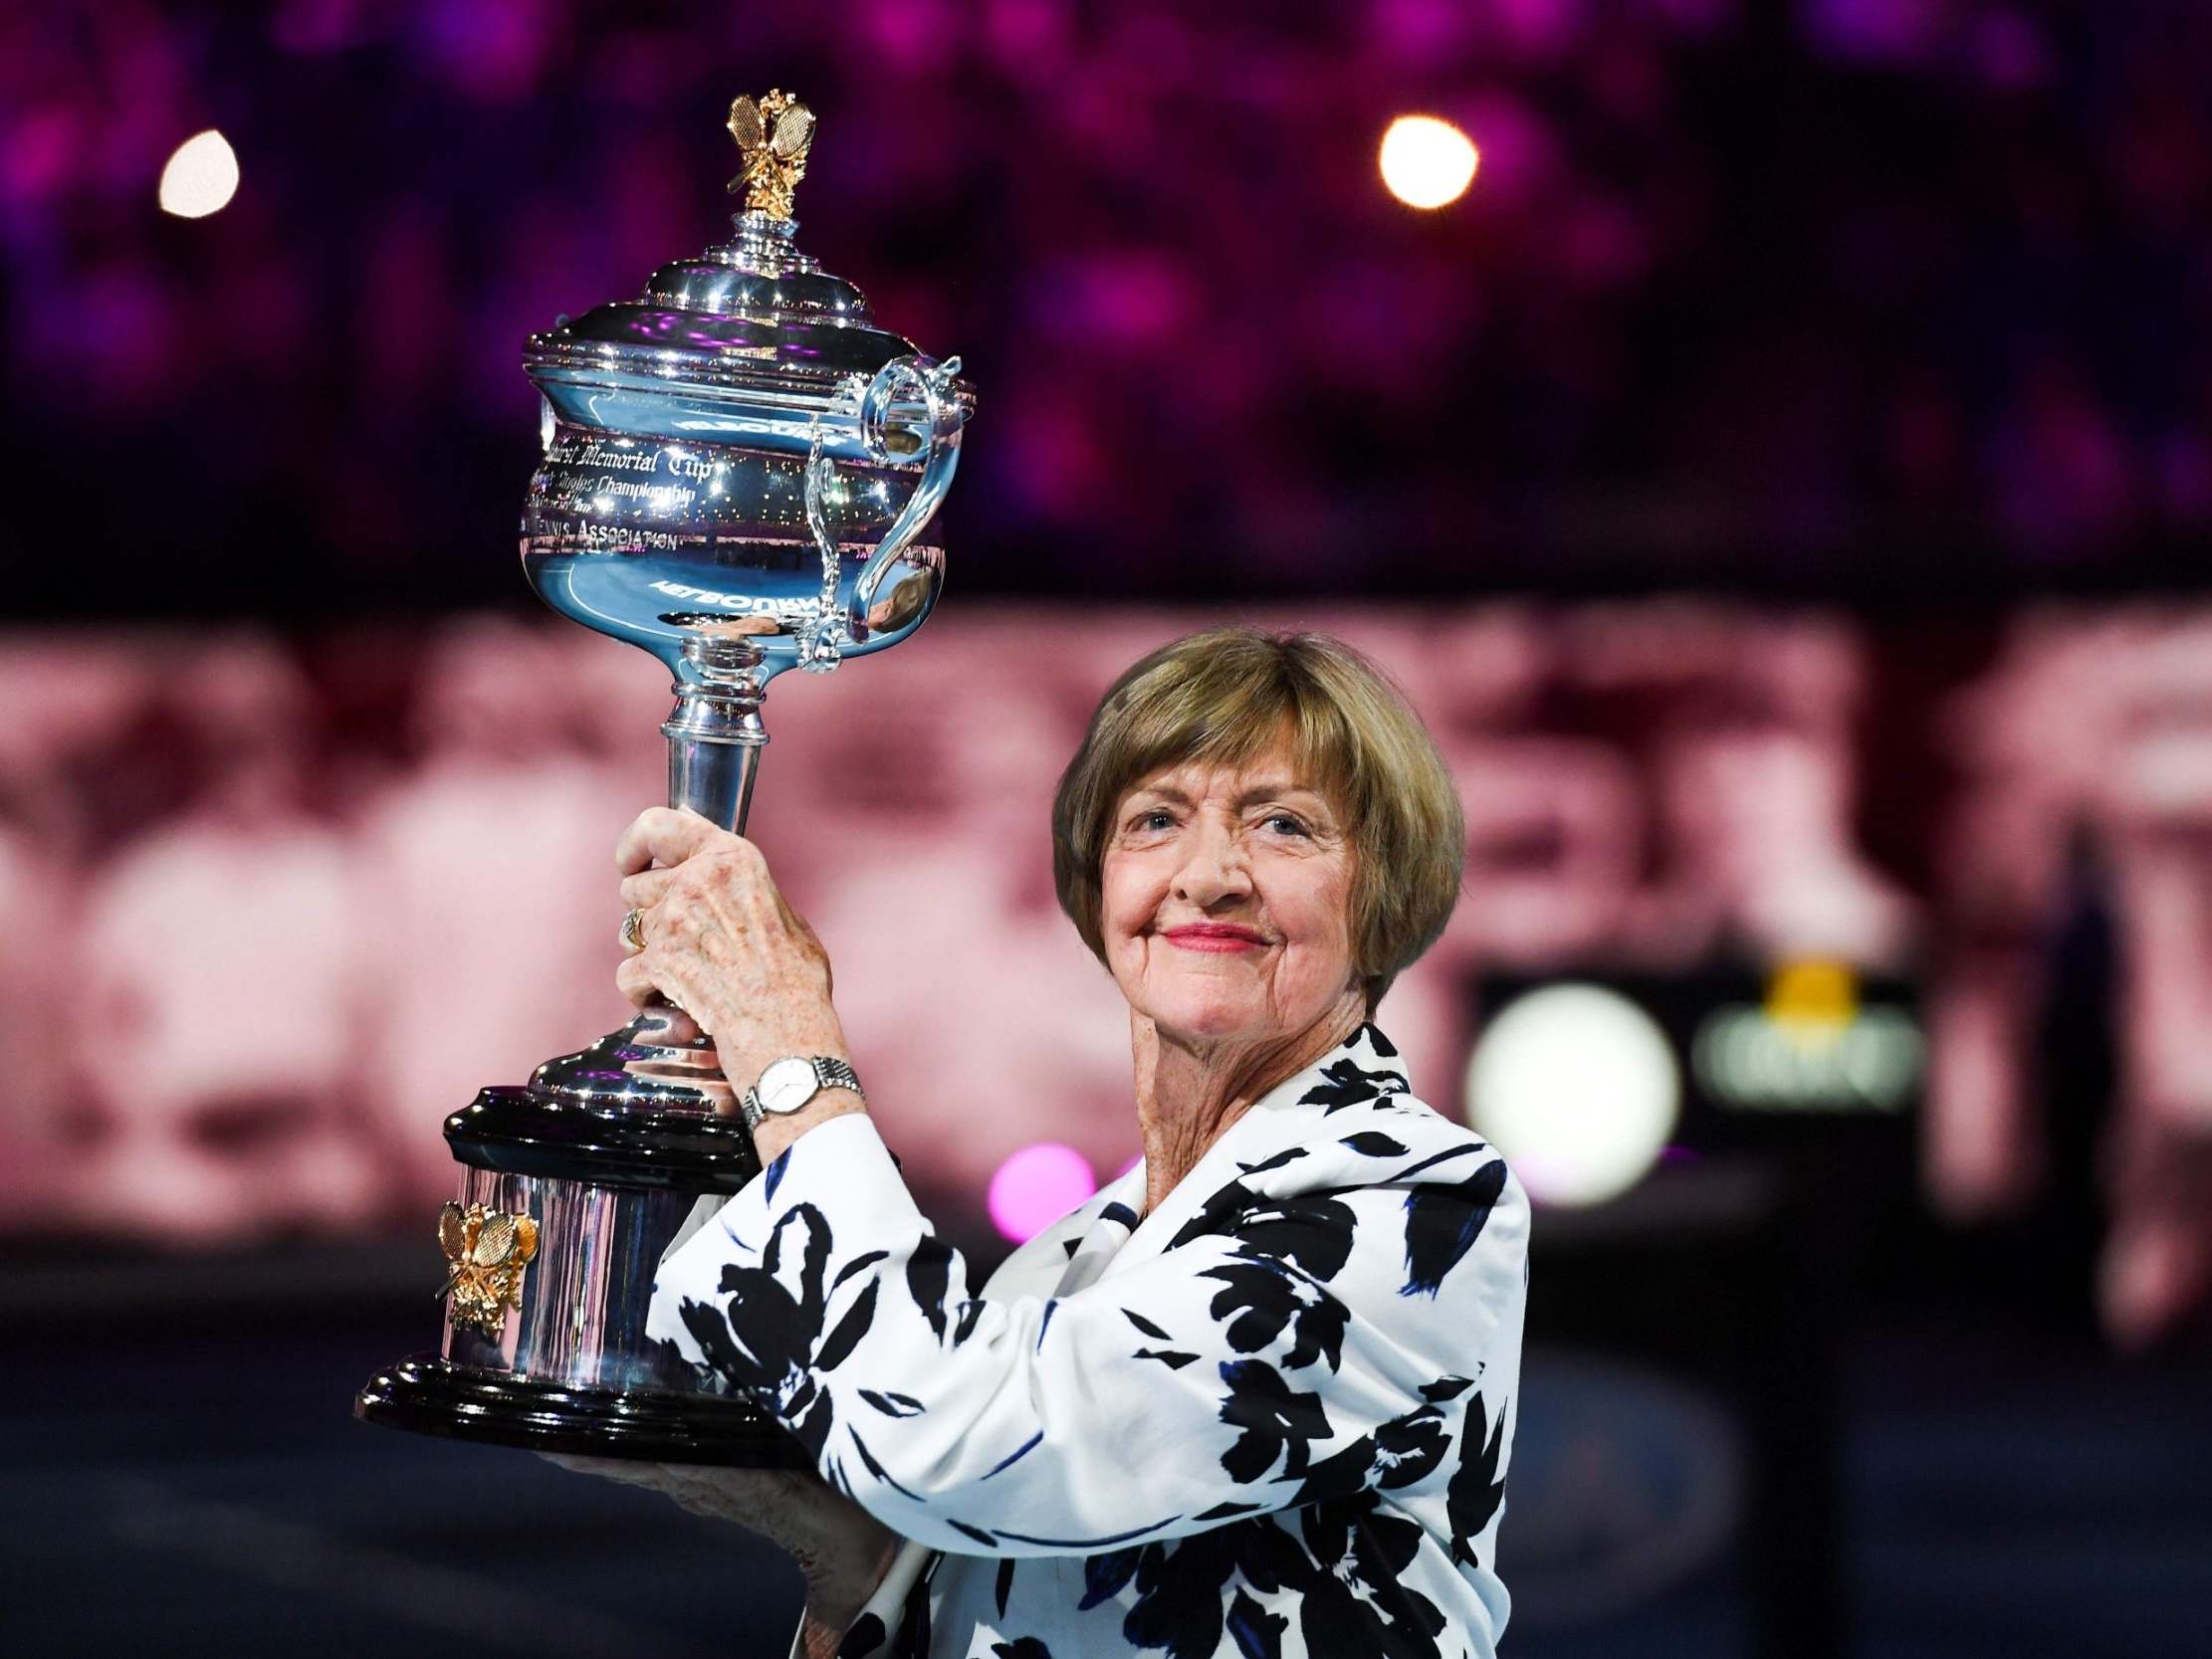 Margaret Court poses at a presentation in Melbourne on Monday